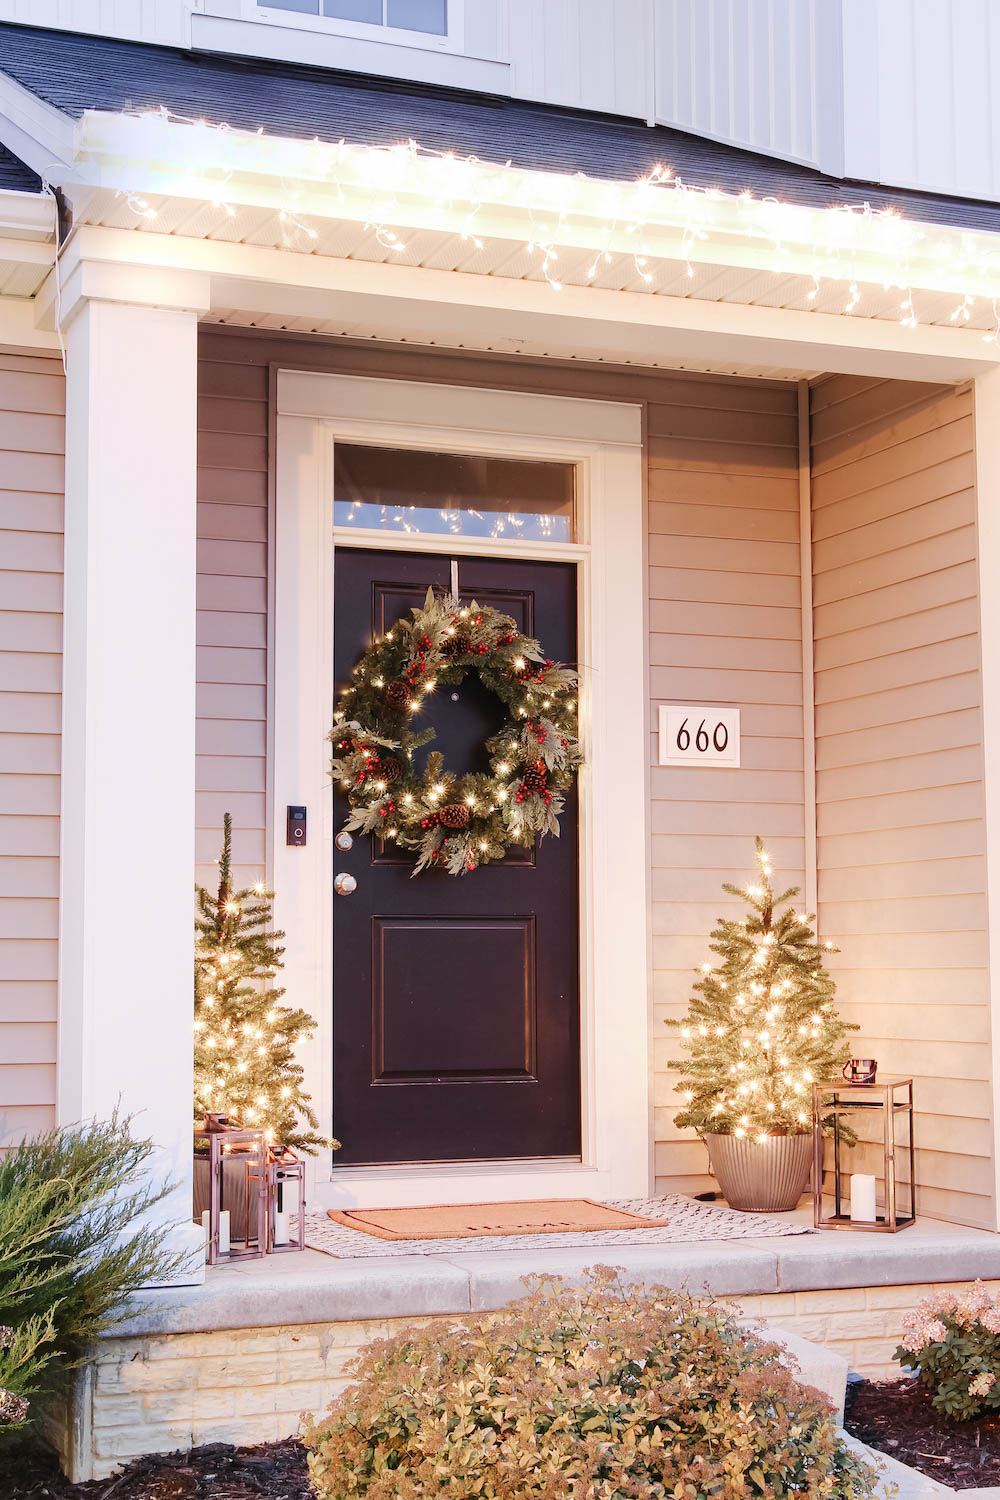 A front porch styled at night with oversized wreath and porch trees lit